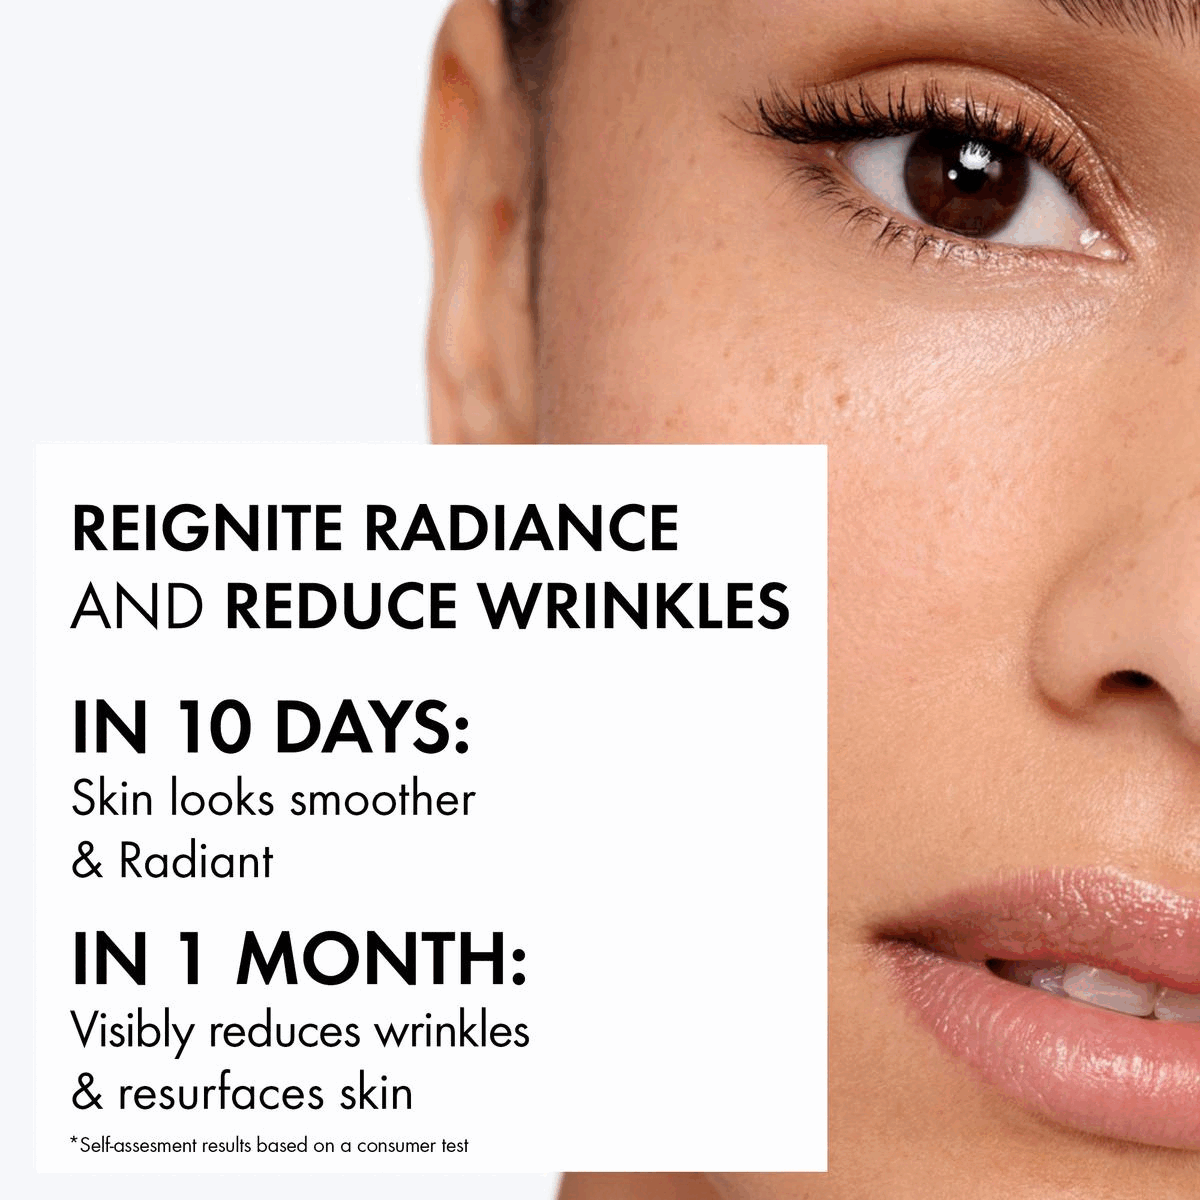 Image 1-Reignite radiance and reduce wrinkles. In 10 days: Skin looks smother and radiant. In 1 month: Visibly reduces wrinkles and resurface skin. Image 2- Reignite radiance and reduce wrinkles